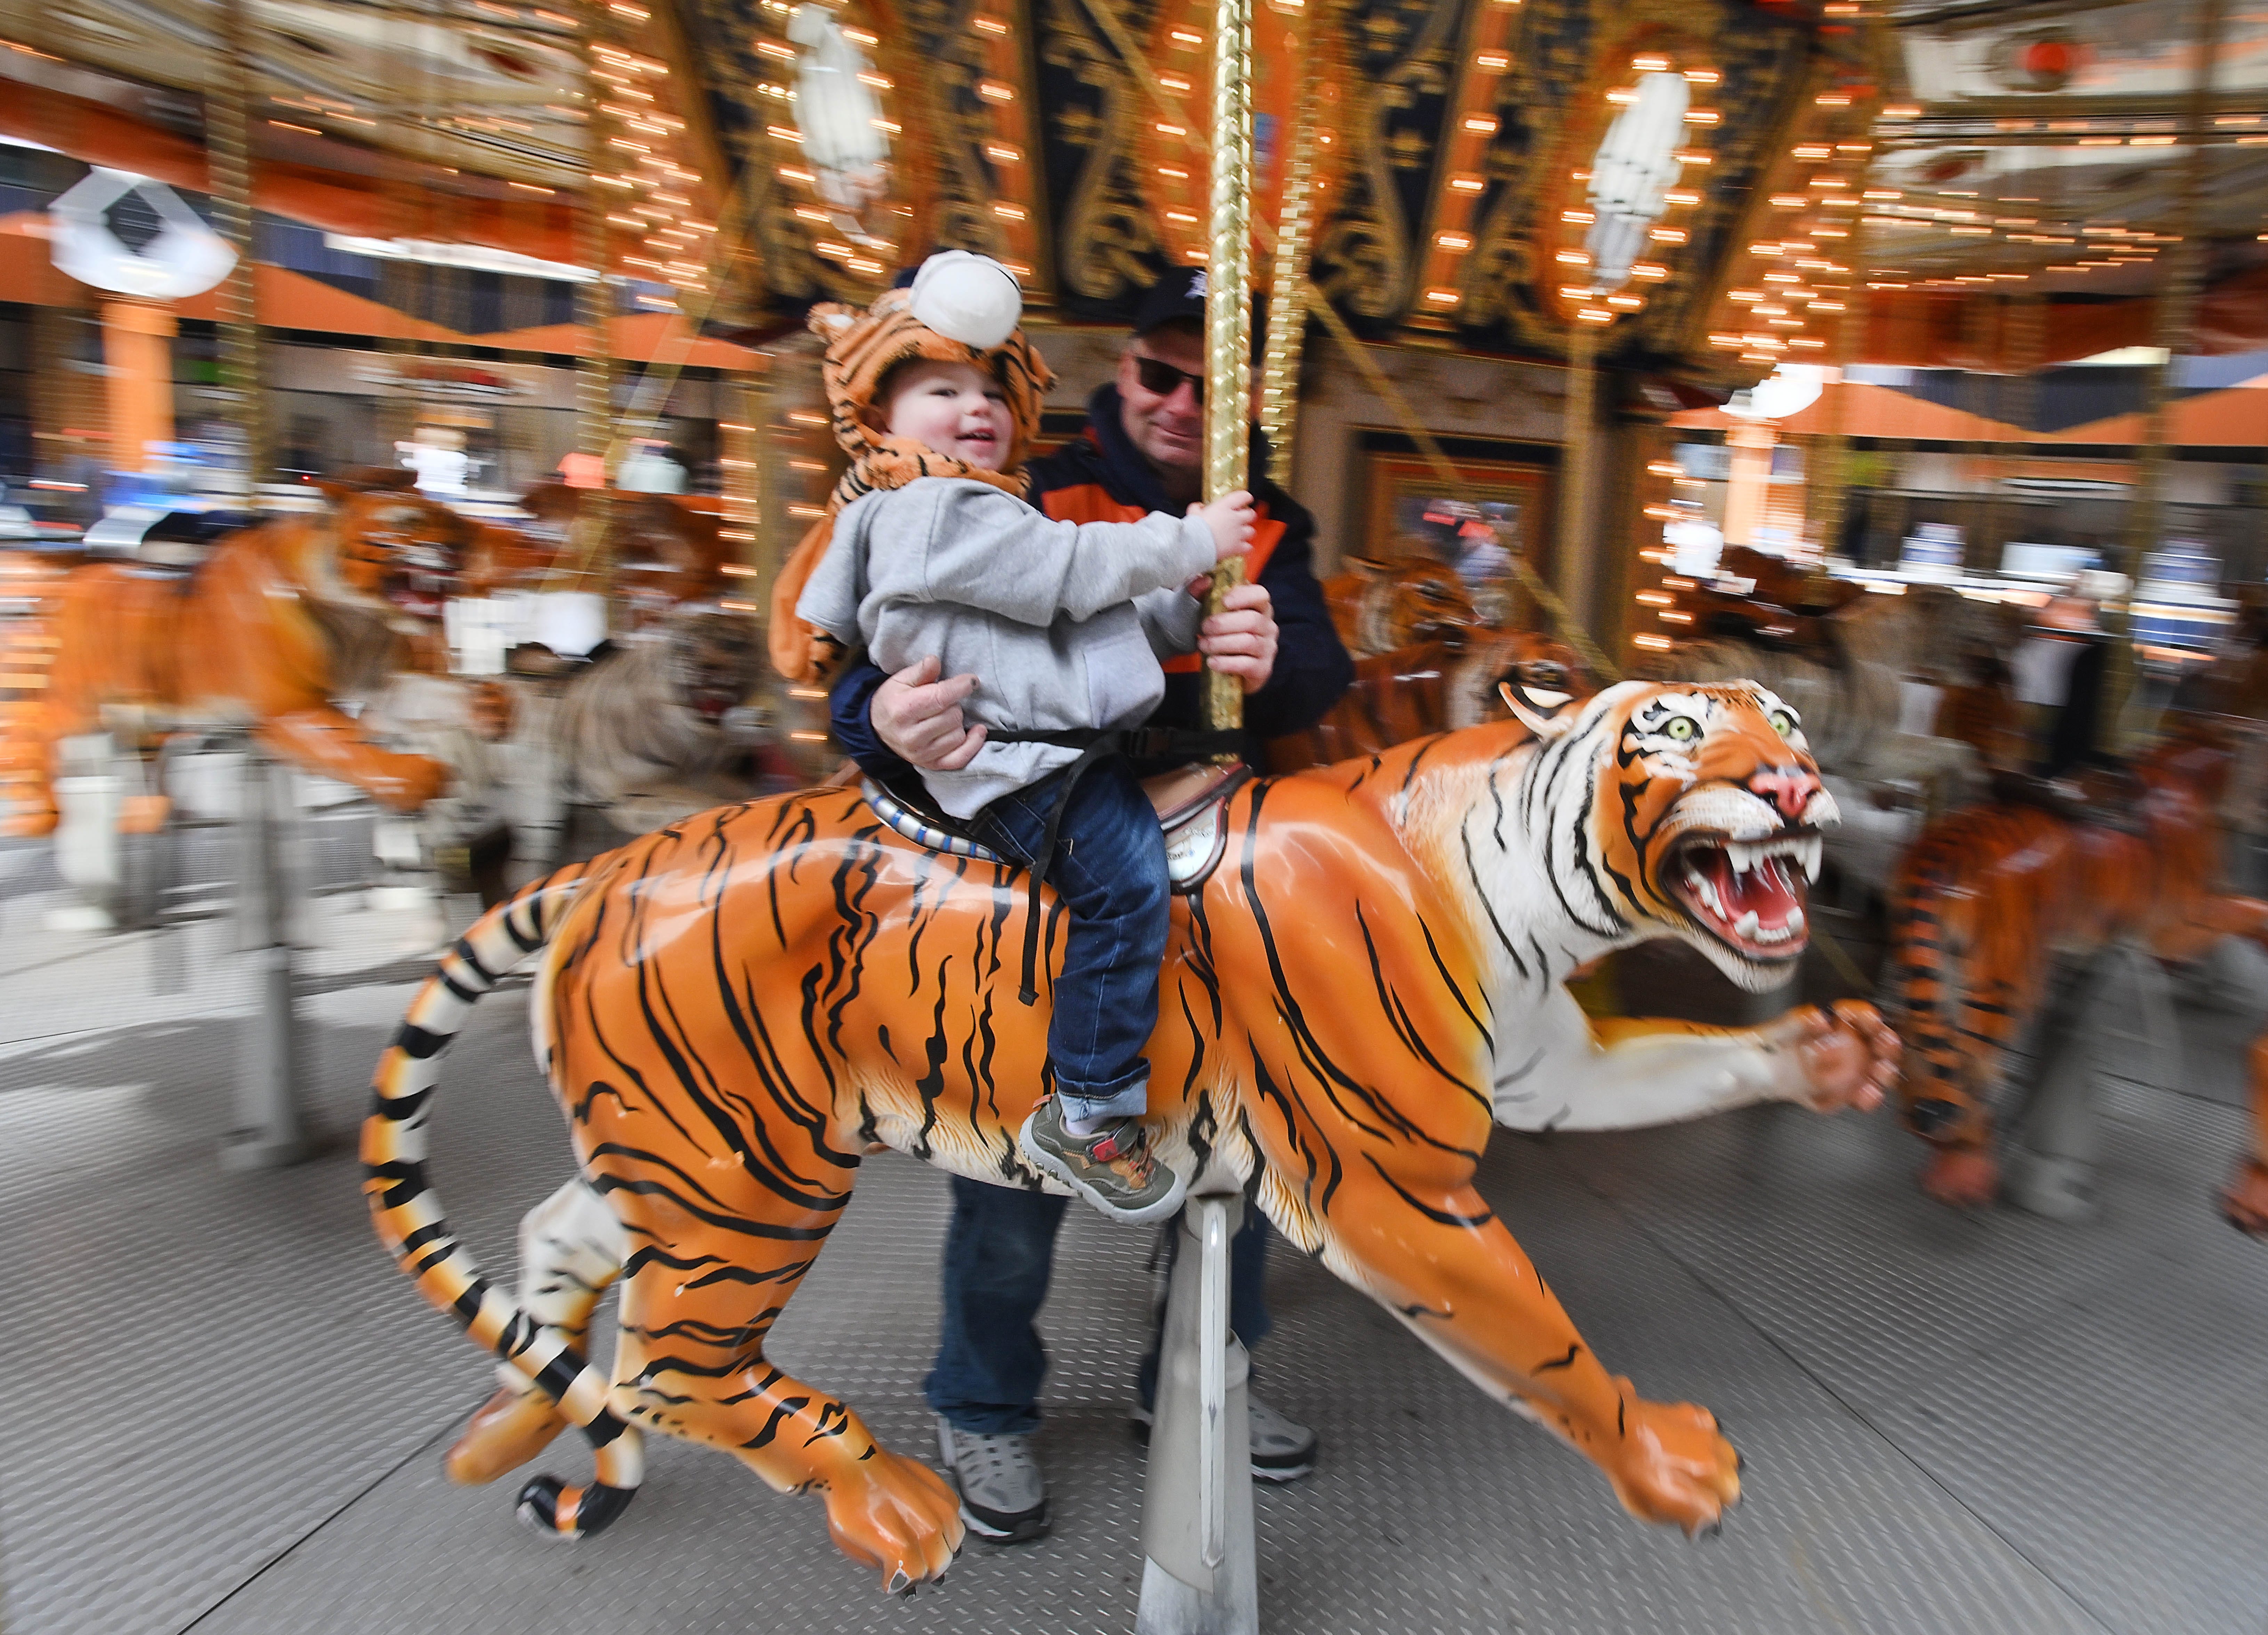 Larry Dick with grandson Franklin Hernandez, 2 on the merry-go-round at Comerica Park.
Detroit Tigers home opener at Comerica Park in Detroit, Michigan on April 6, 2023.